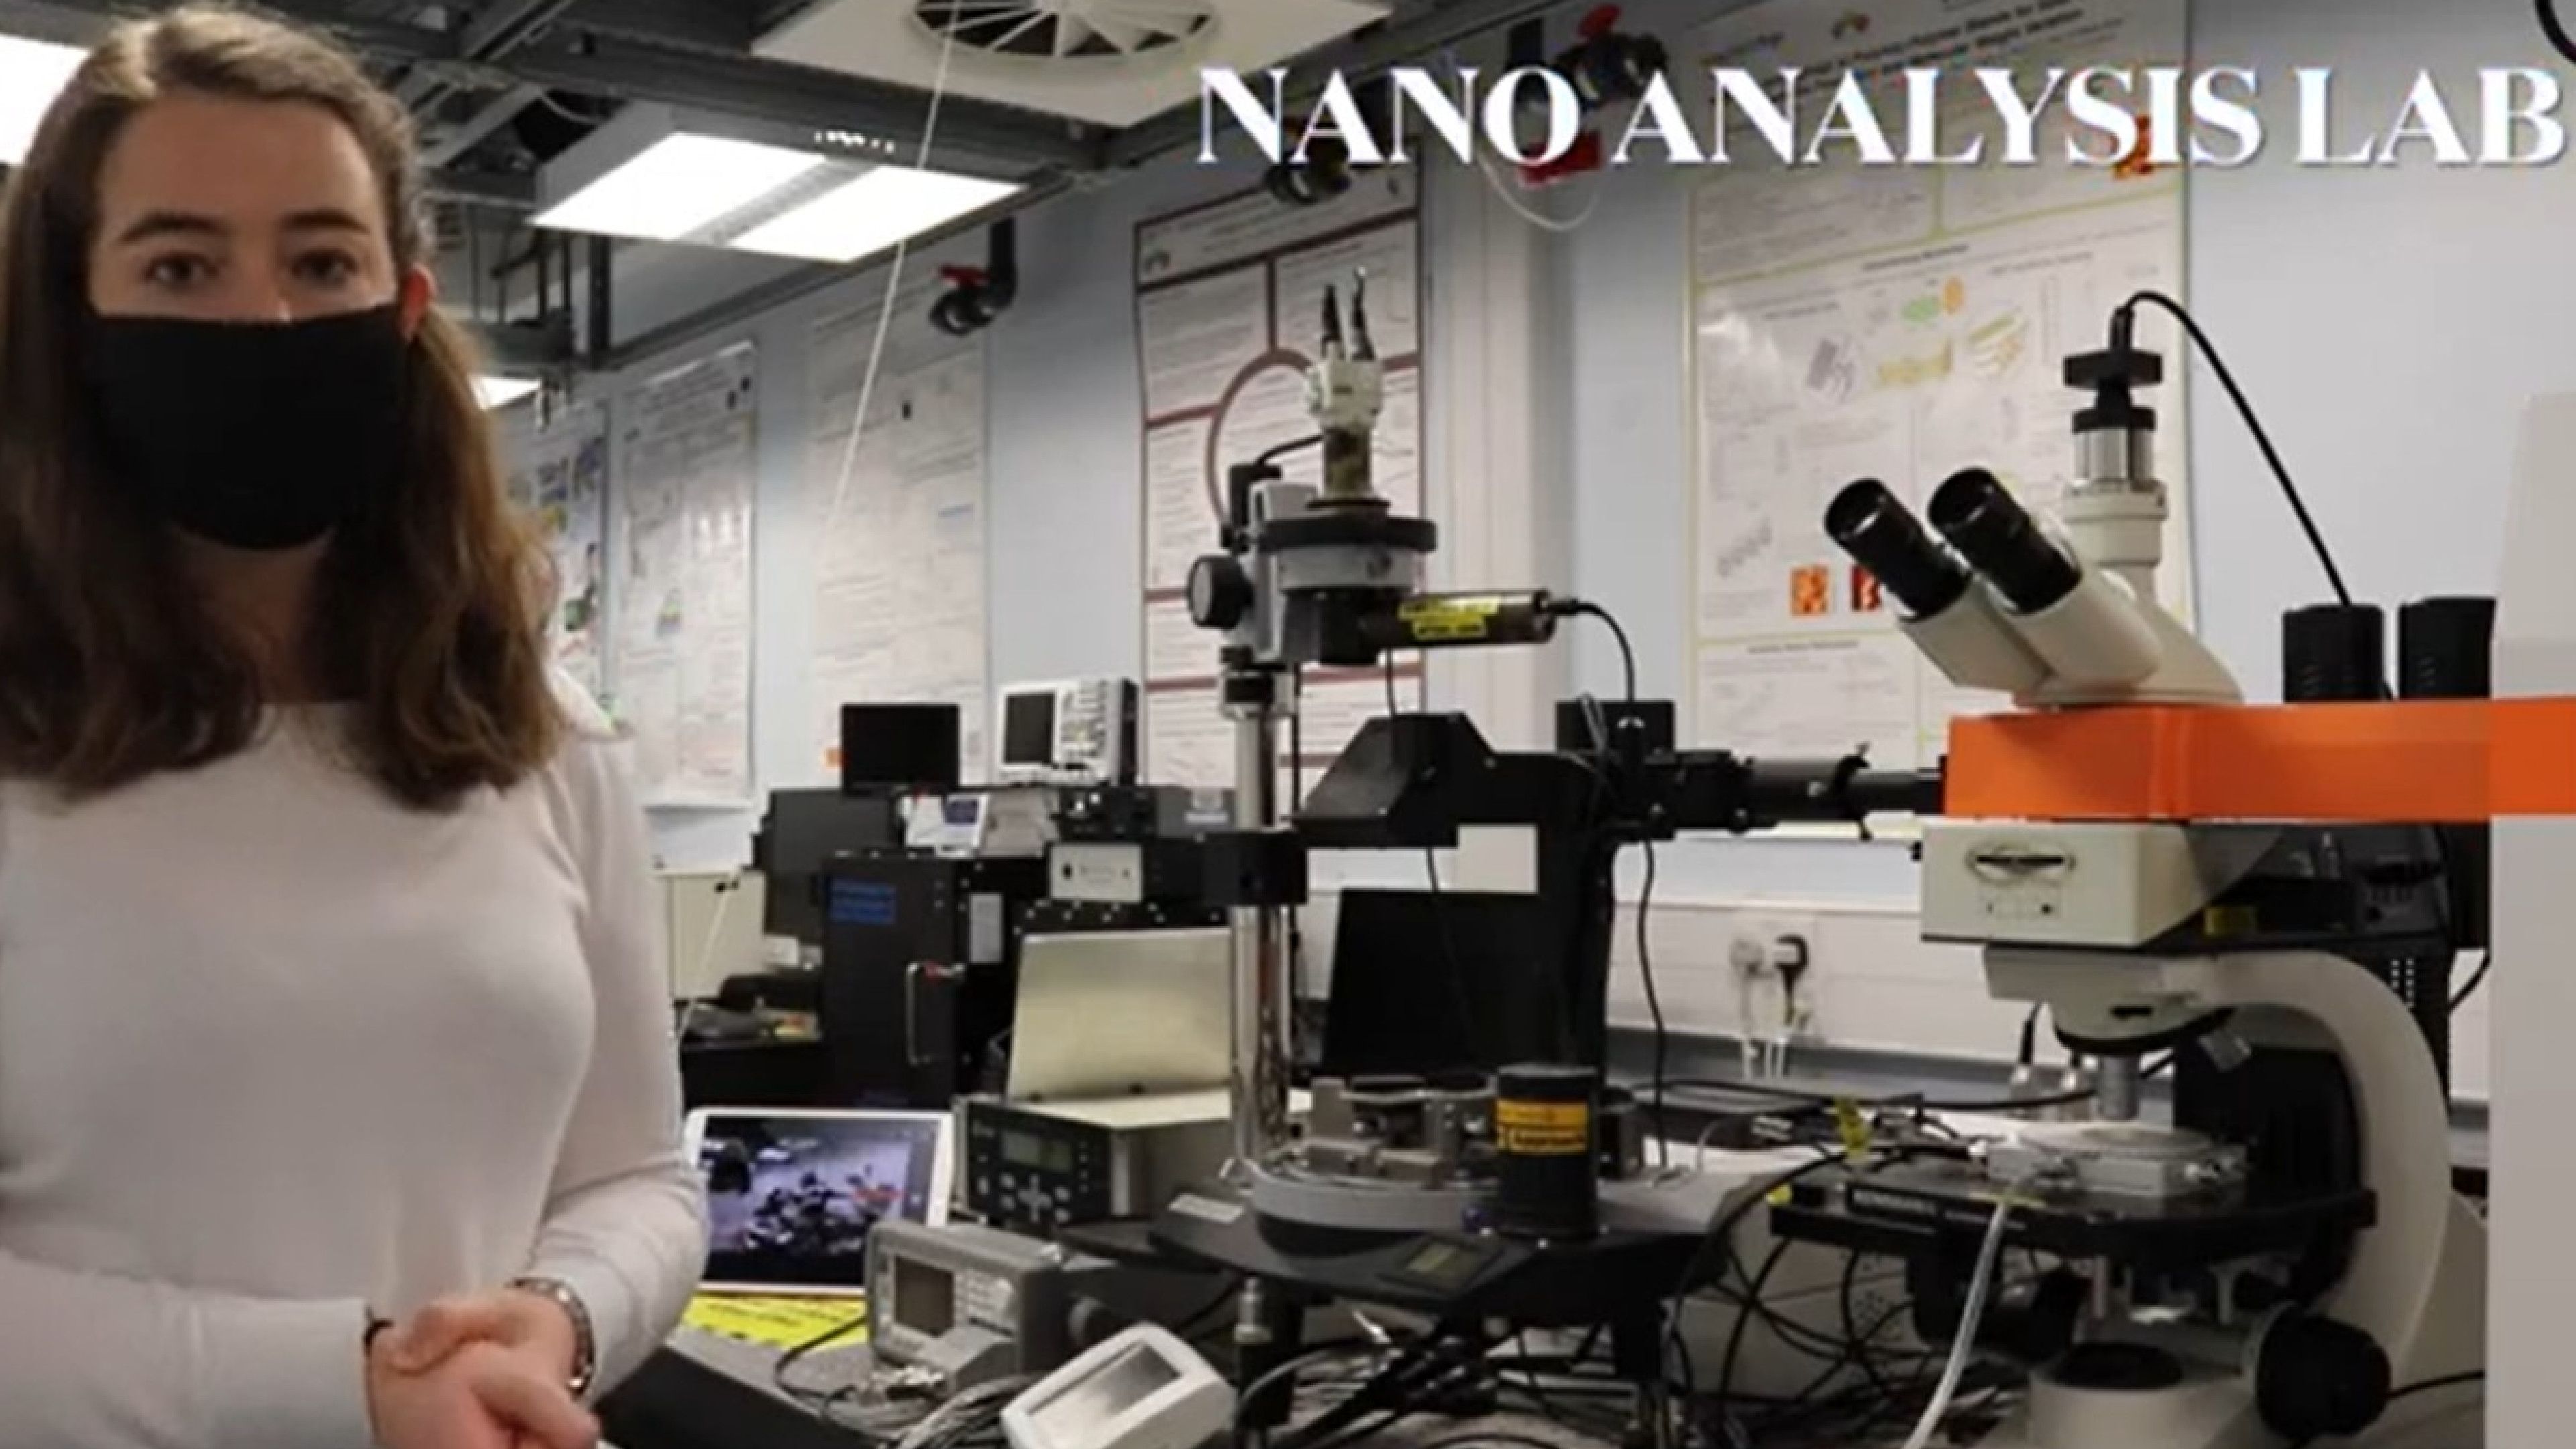 A tour of the Nanoanalysis lab and instruments 